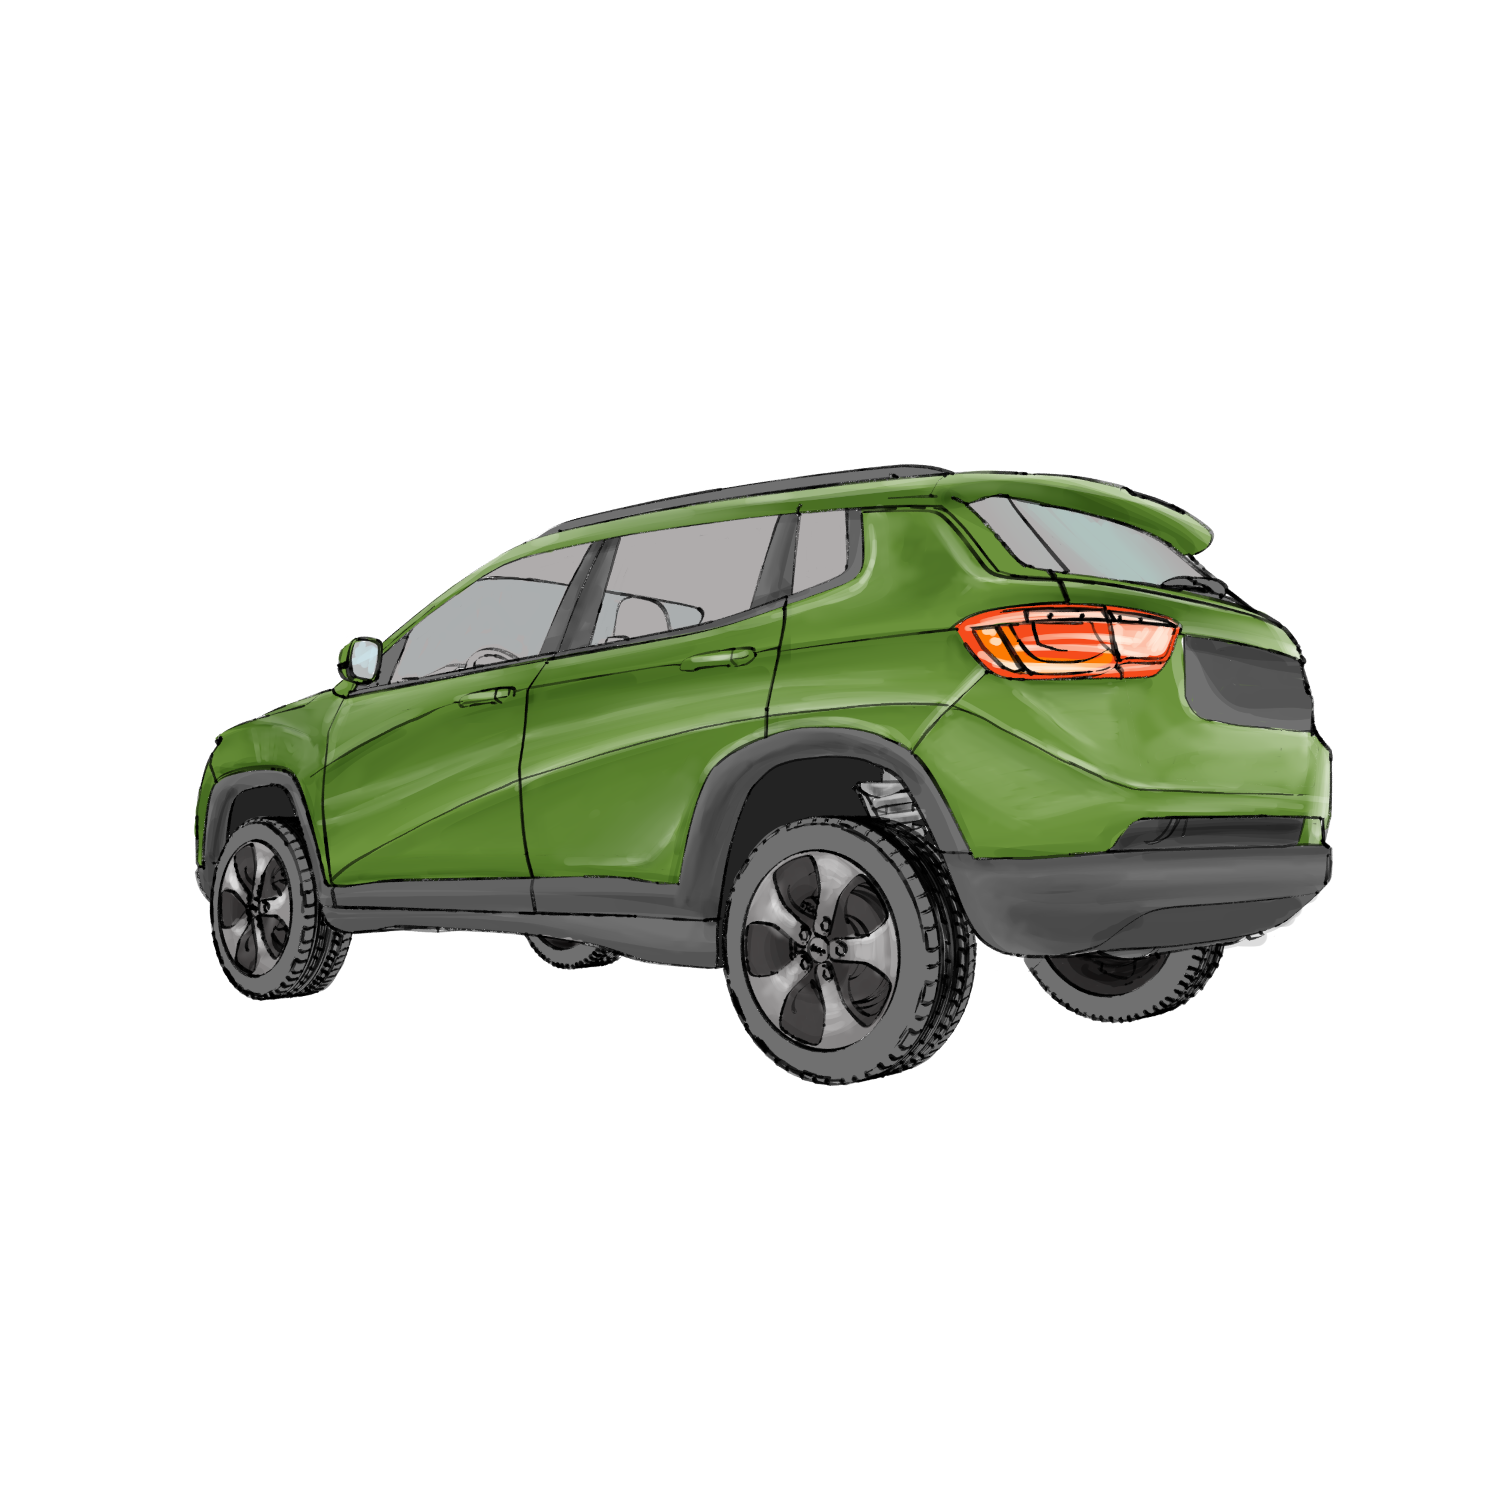  Product image 3 of the product “OX5 Family SUV ”